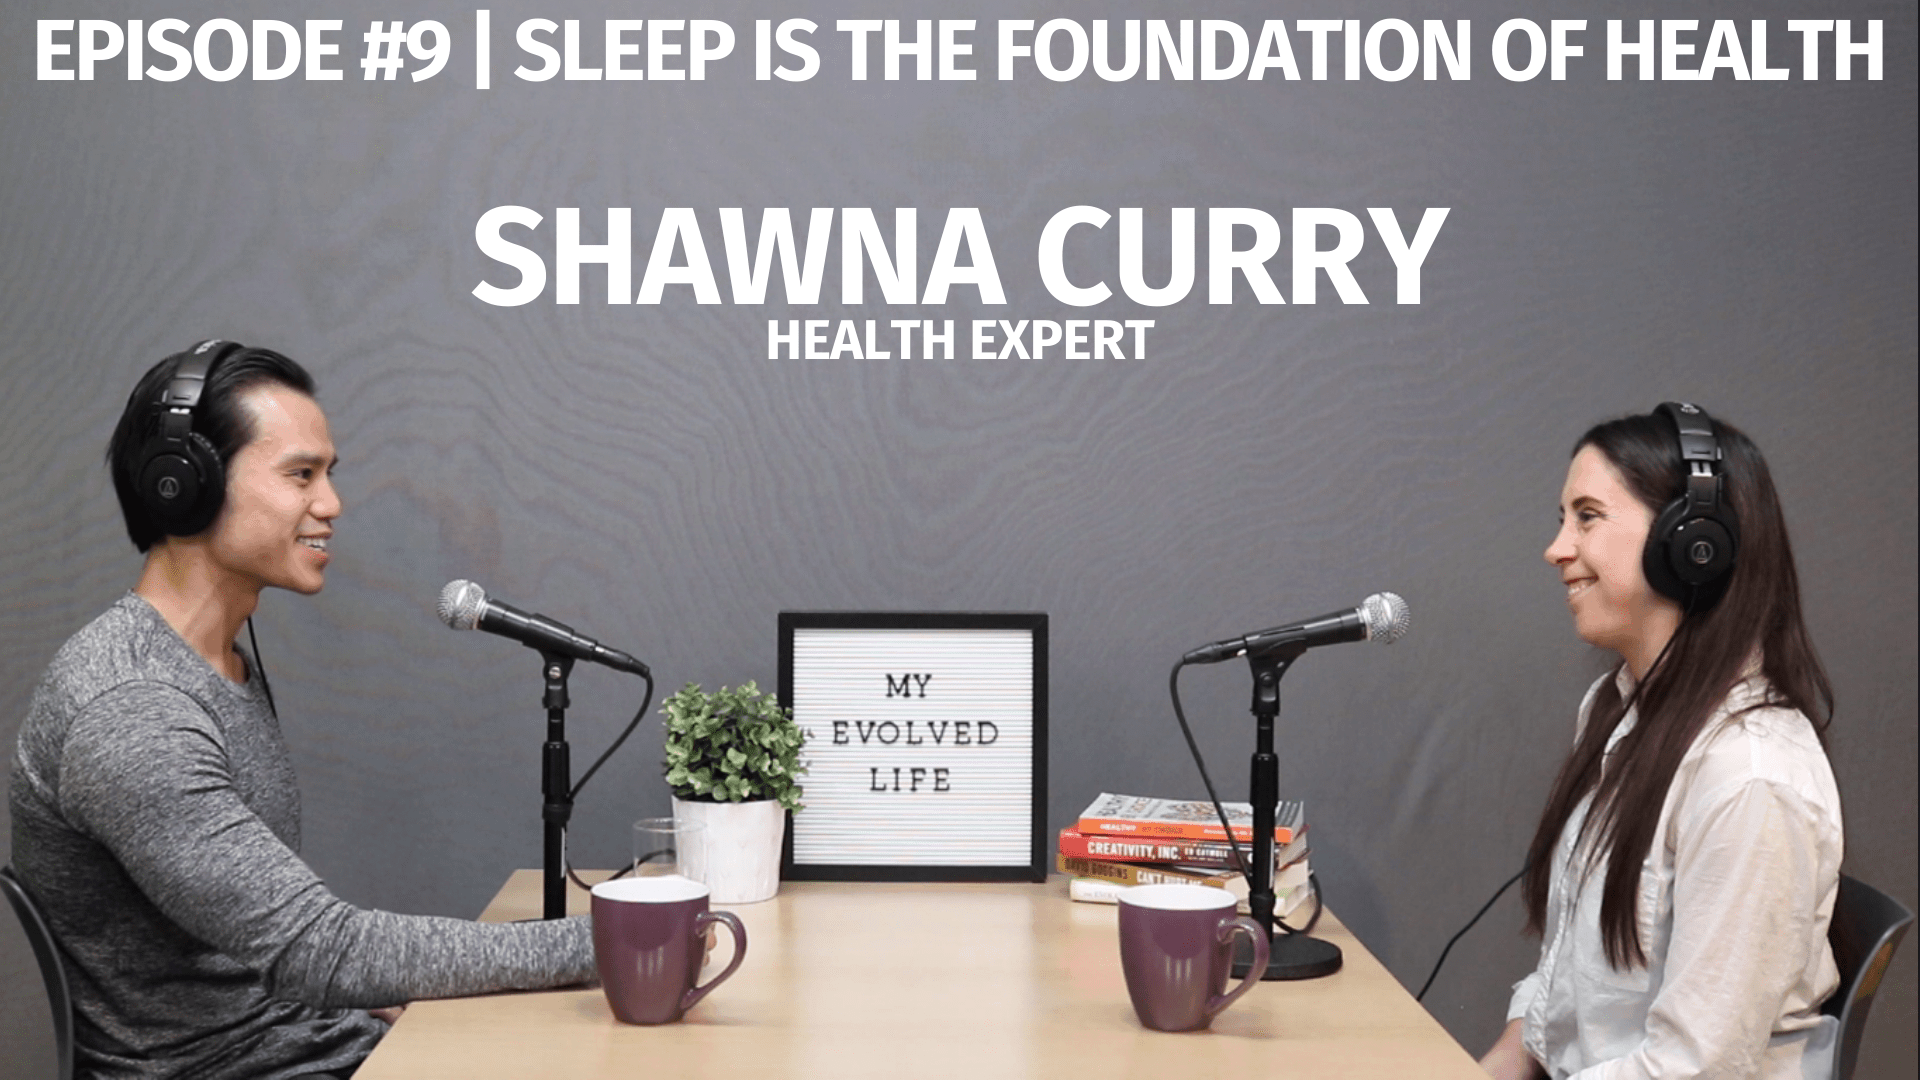 My Evolved Life Episode #9 - Shawna Curry - Sleep is the Foundation of Health